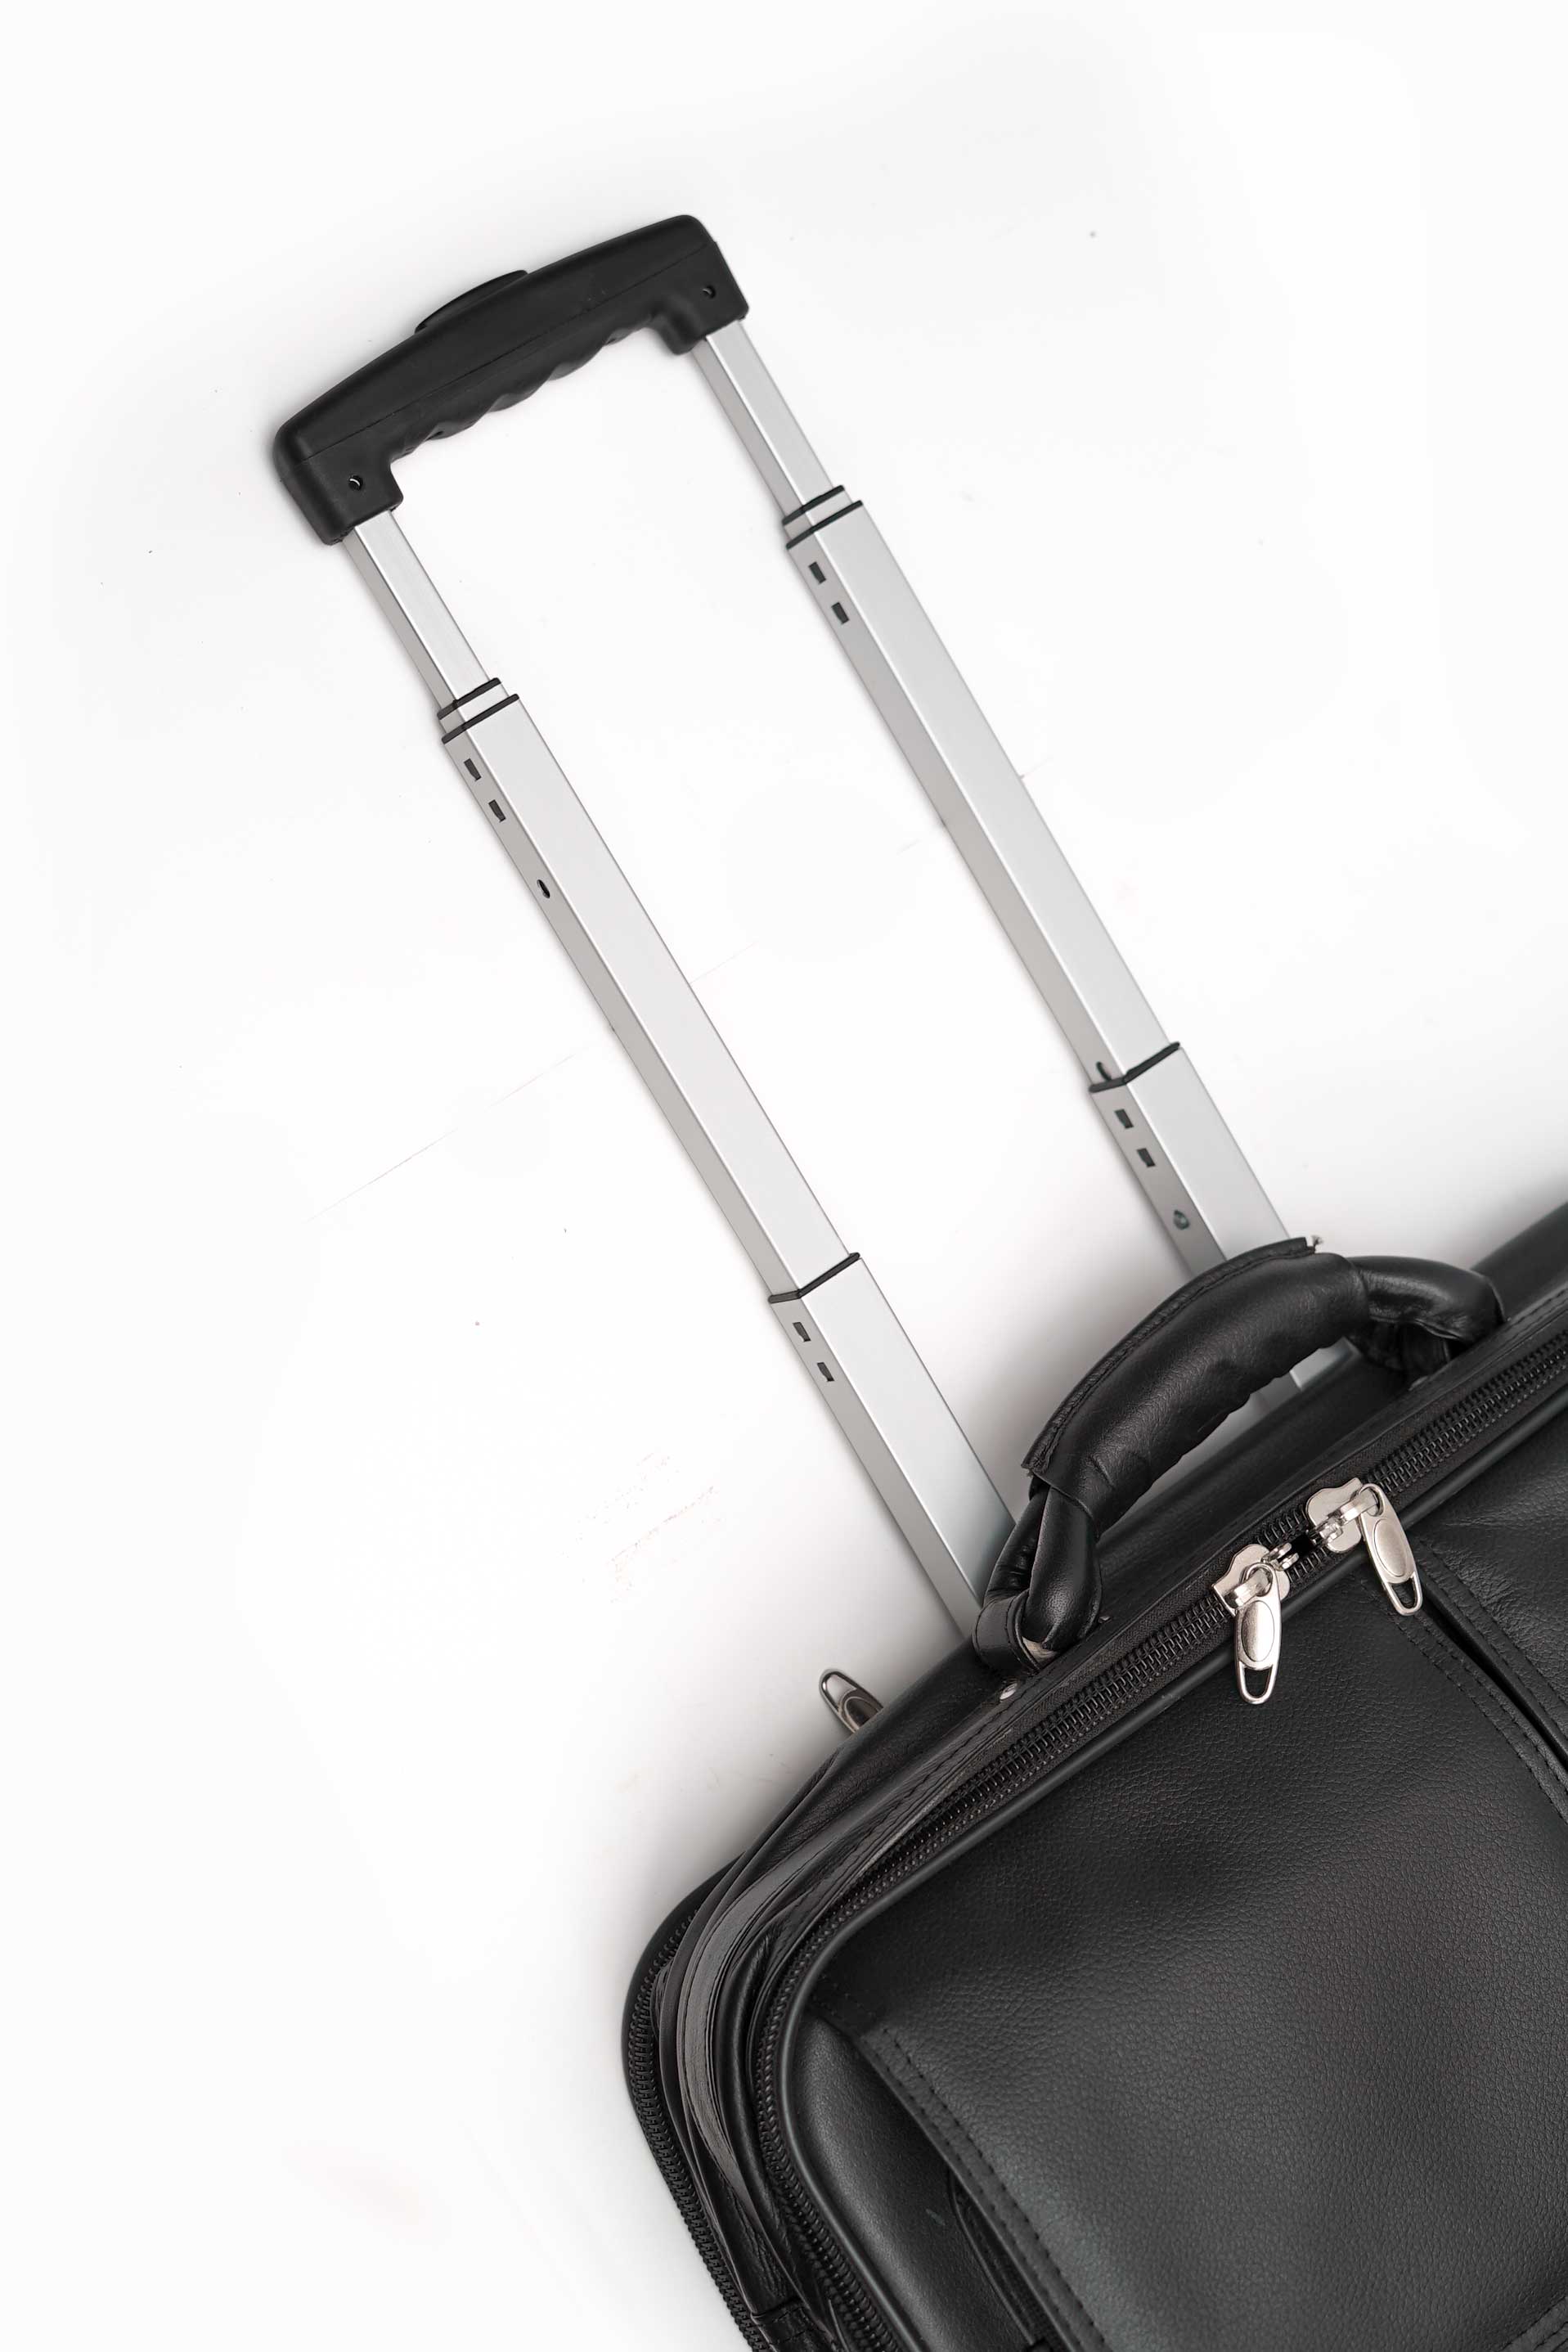 The Travel Mate Trolley Bag